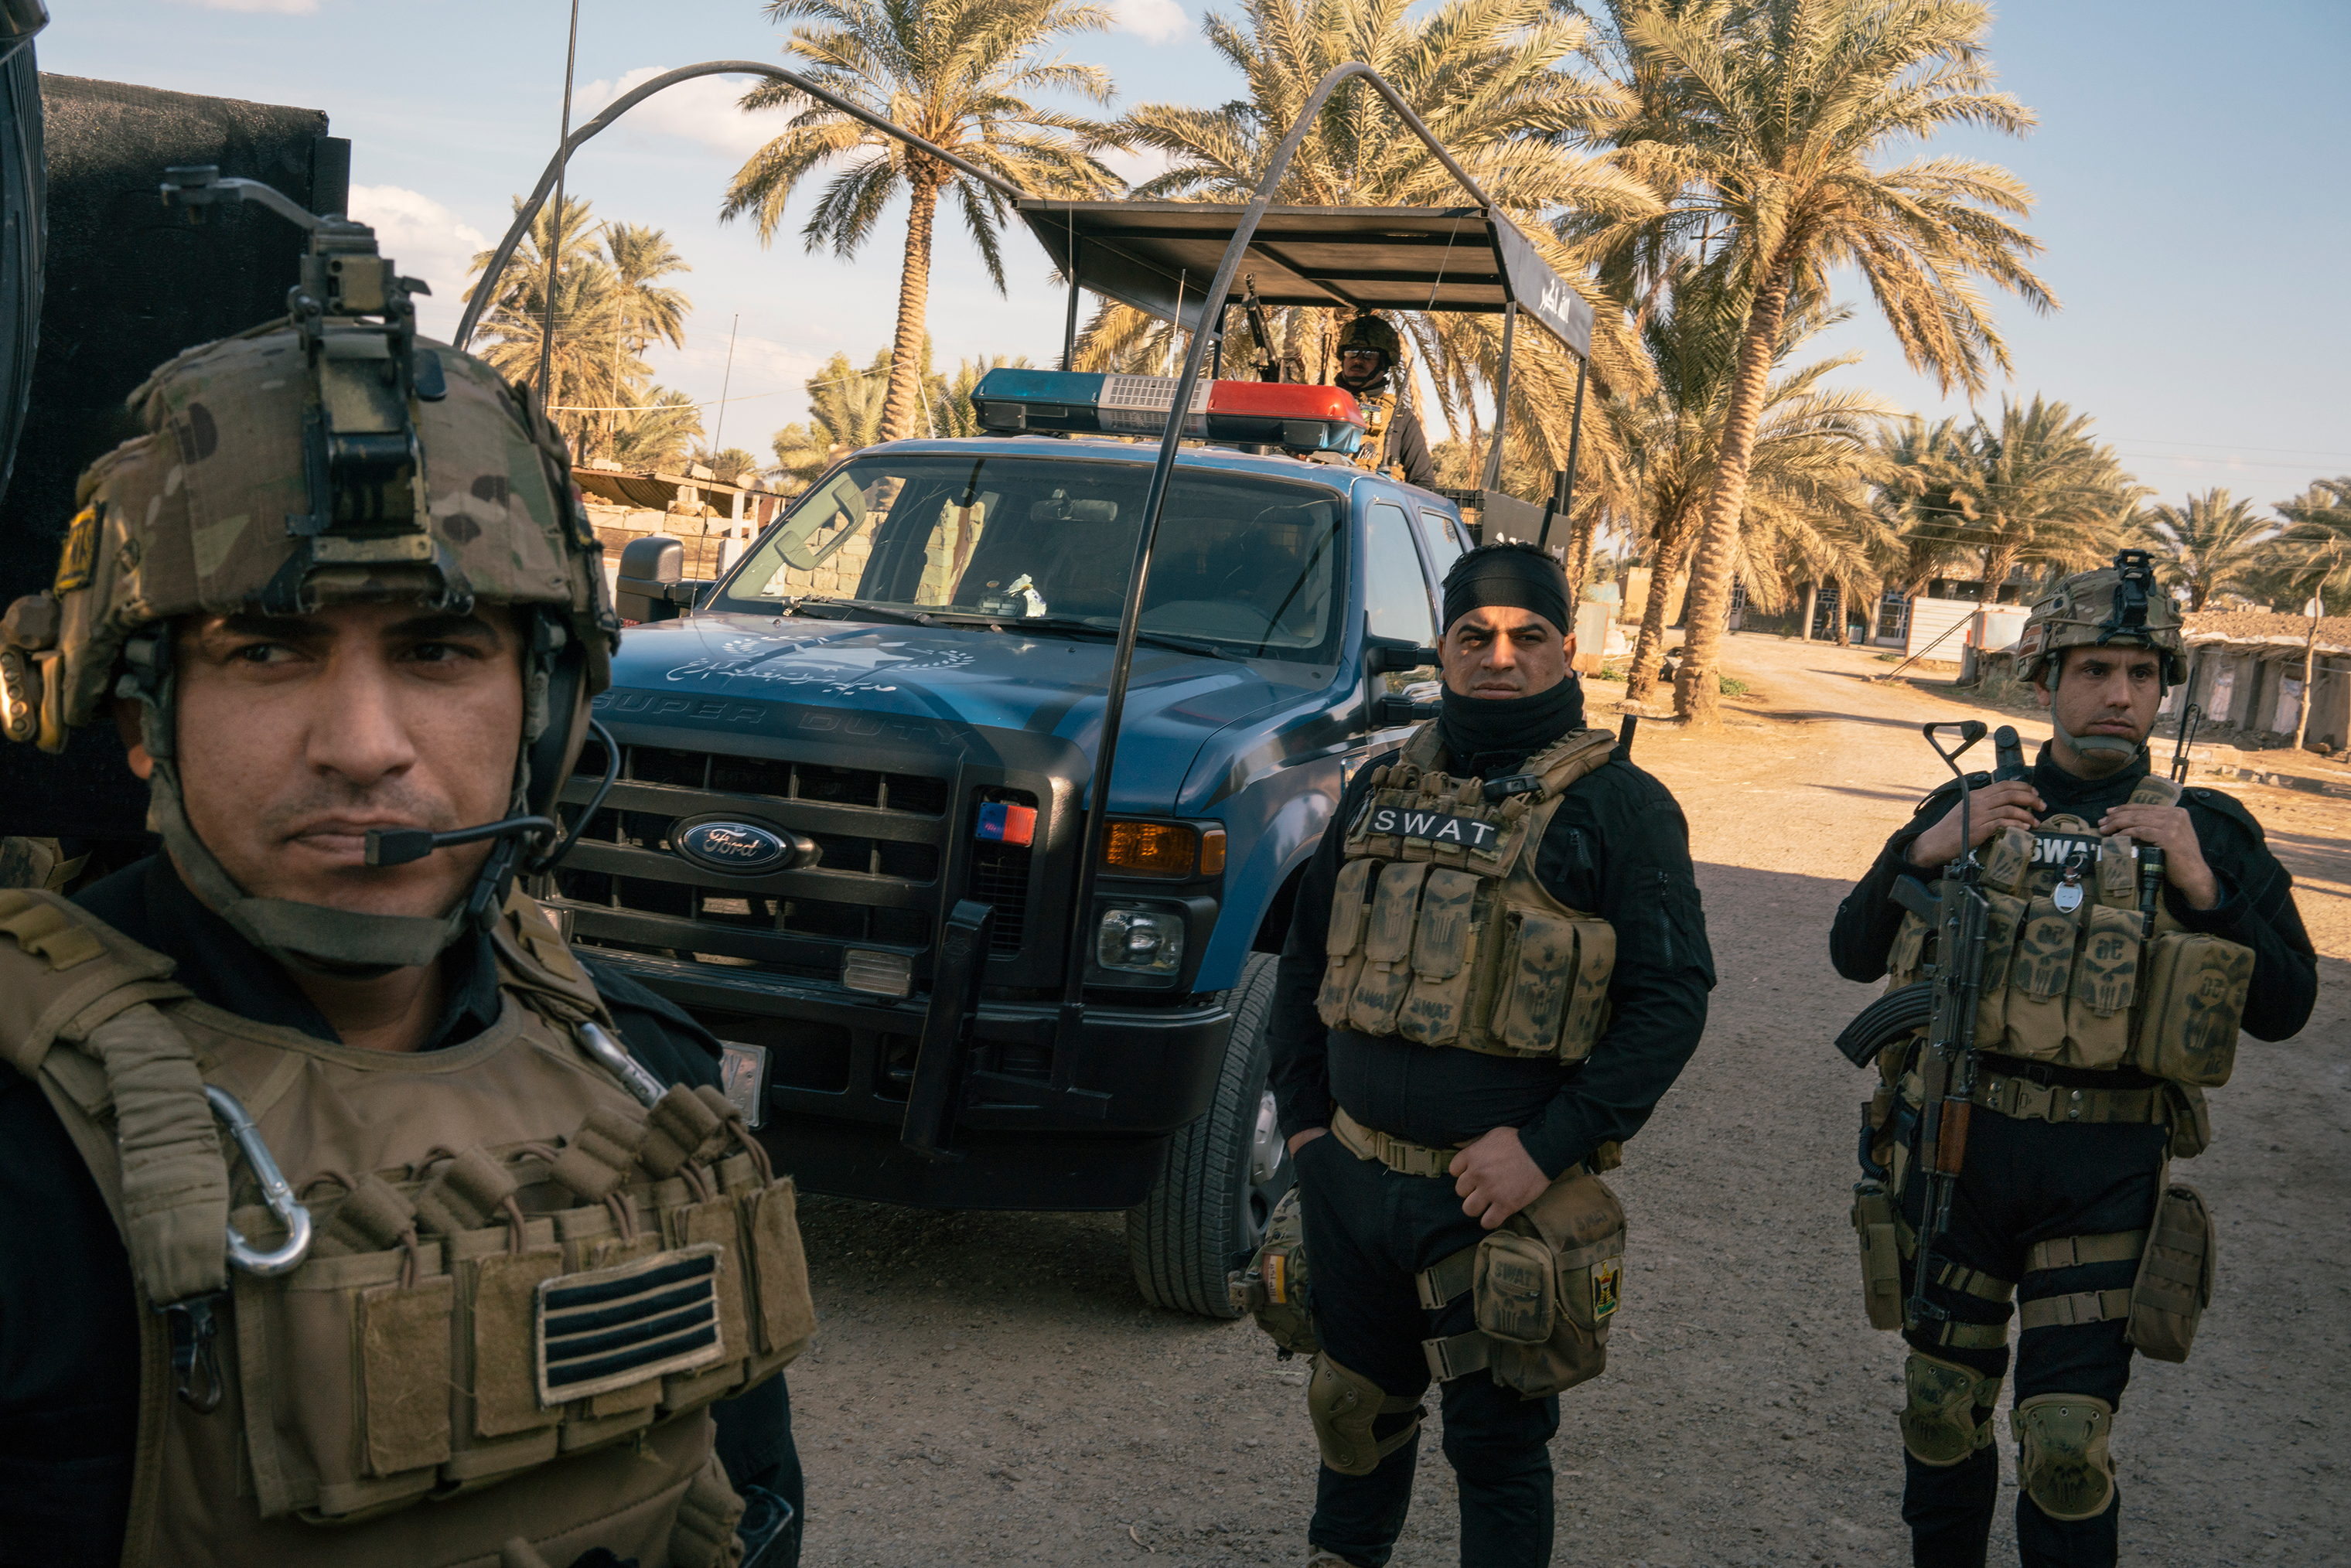 Iraqi special forces near Ibrahim Bin Ali on Jan. 30, a couple dozen miles from Baghdad; the village marks the closest ISIS came to the capital. (Emanuele Satolli for TIME)